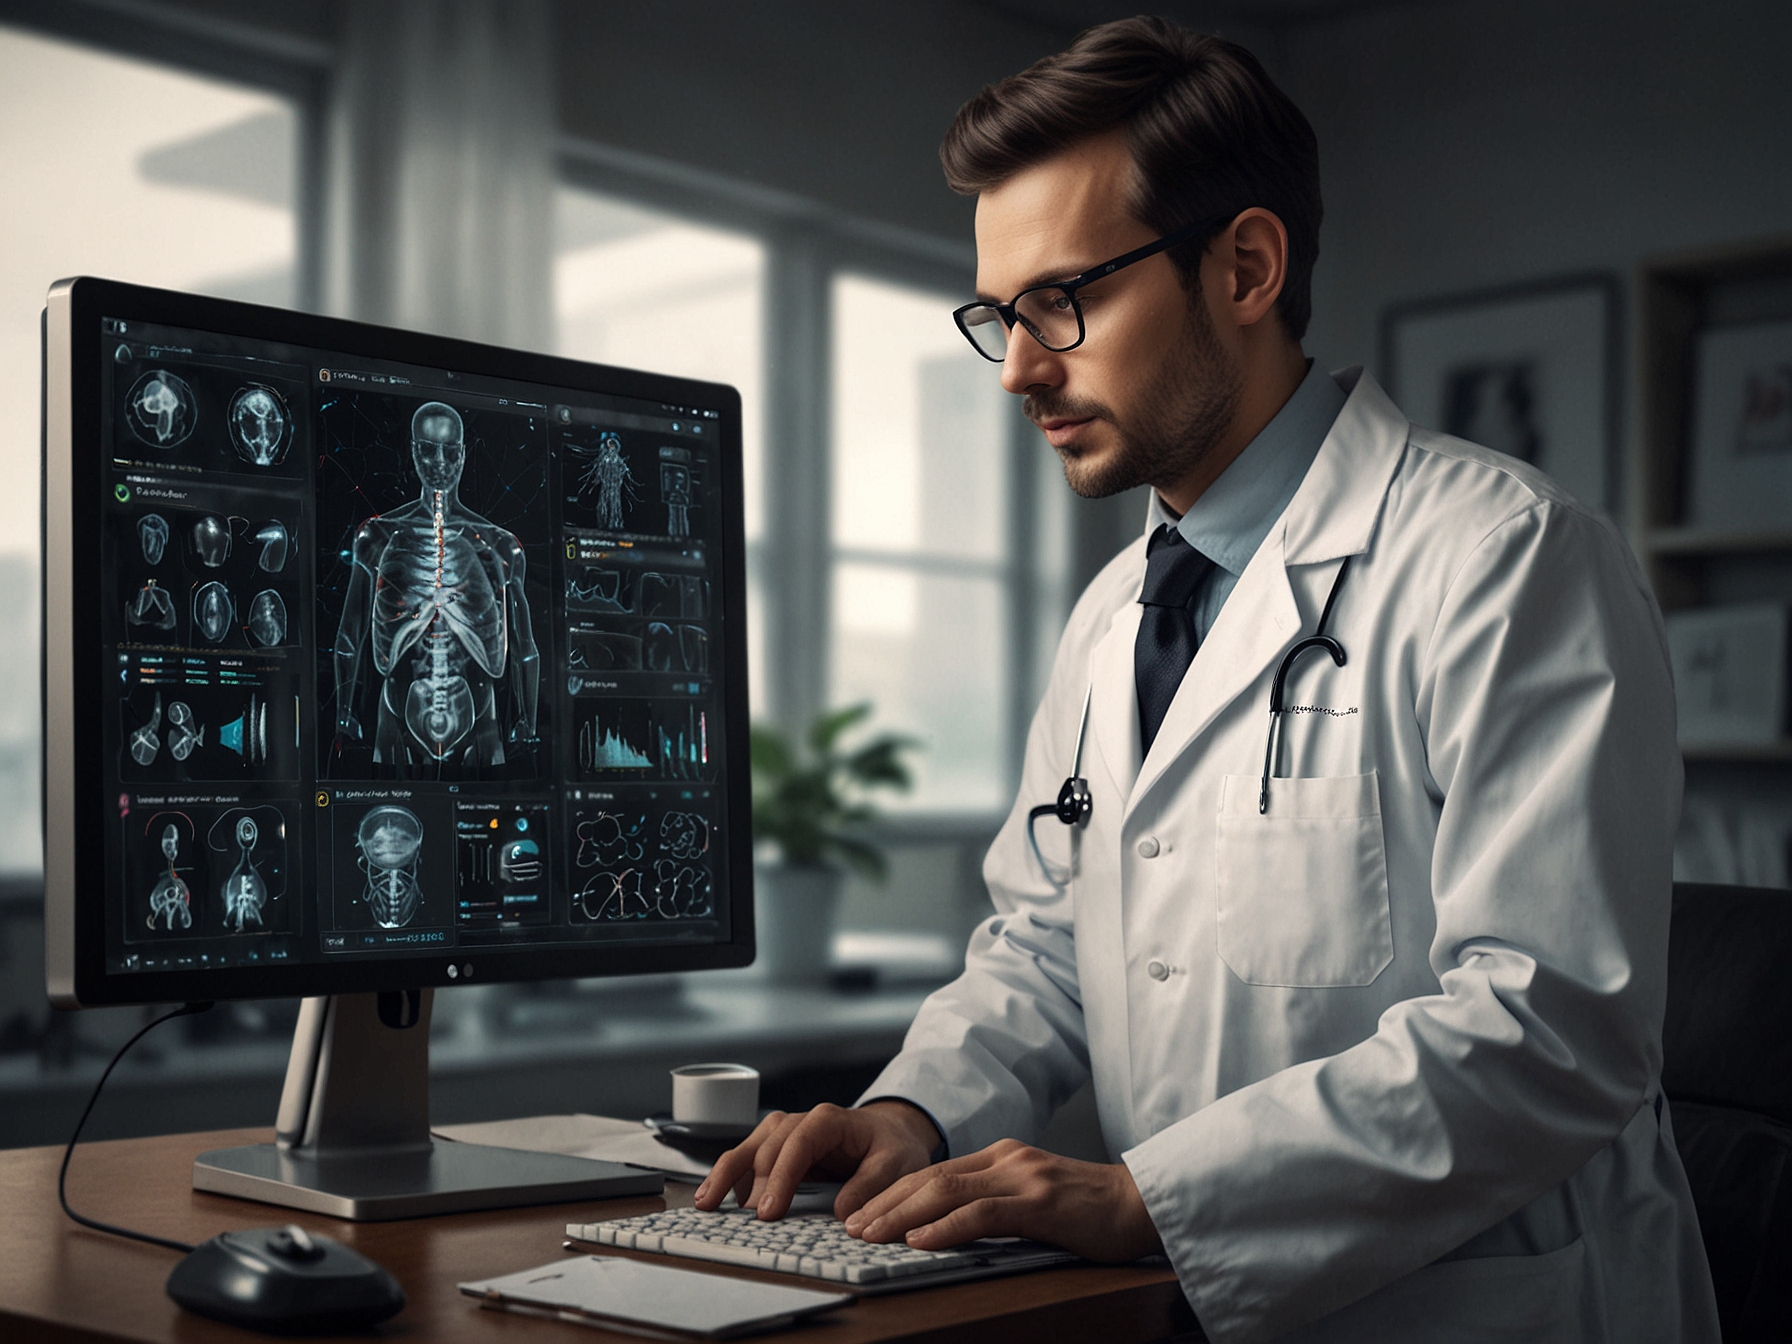 An illustration of AI algorithms in healthcare, depicting a doctor using AI to assist in disease diagnosis, highlighting improved efficiency and patient outcomes.